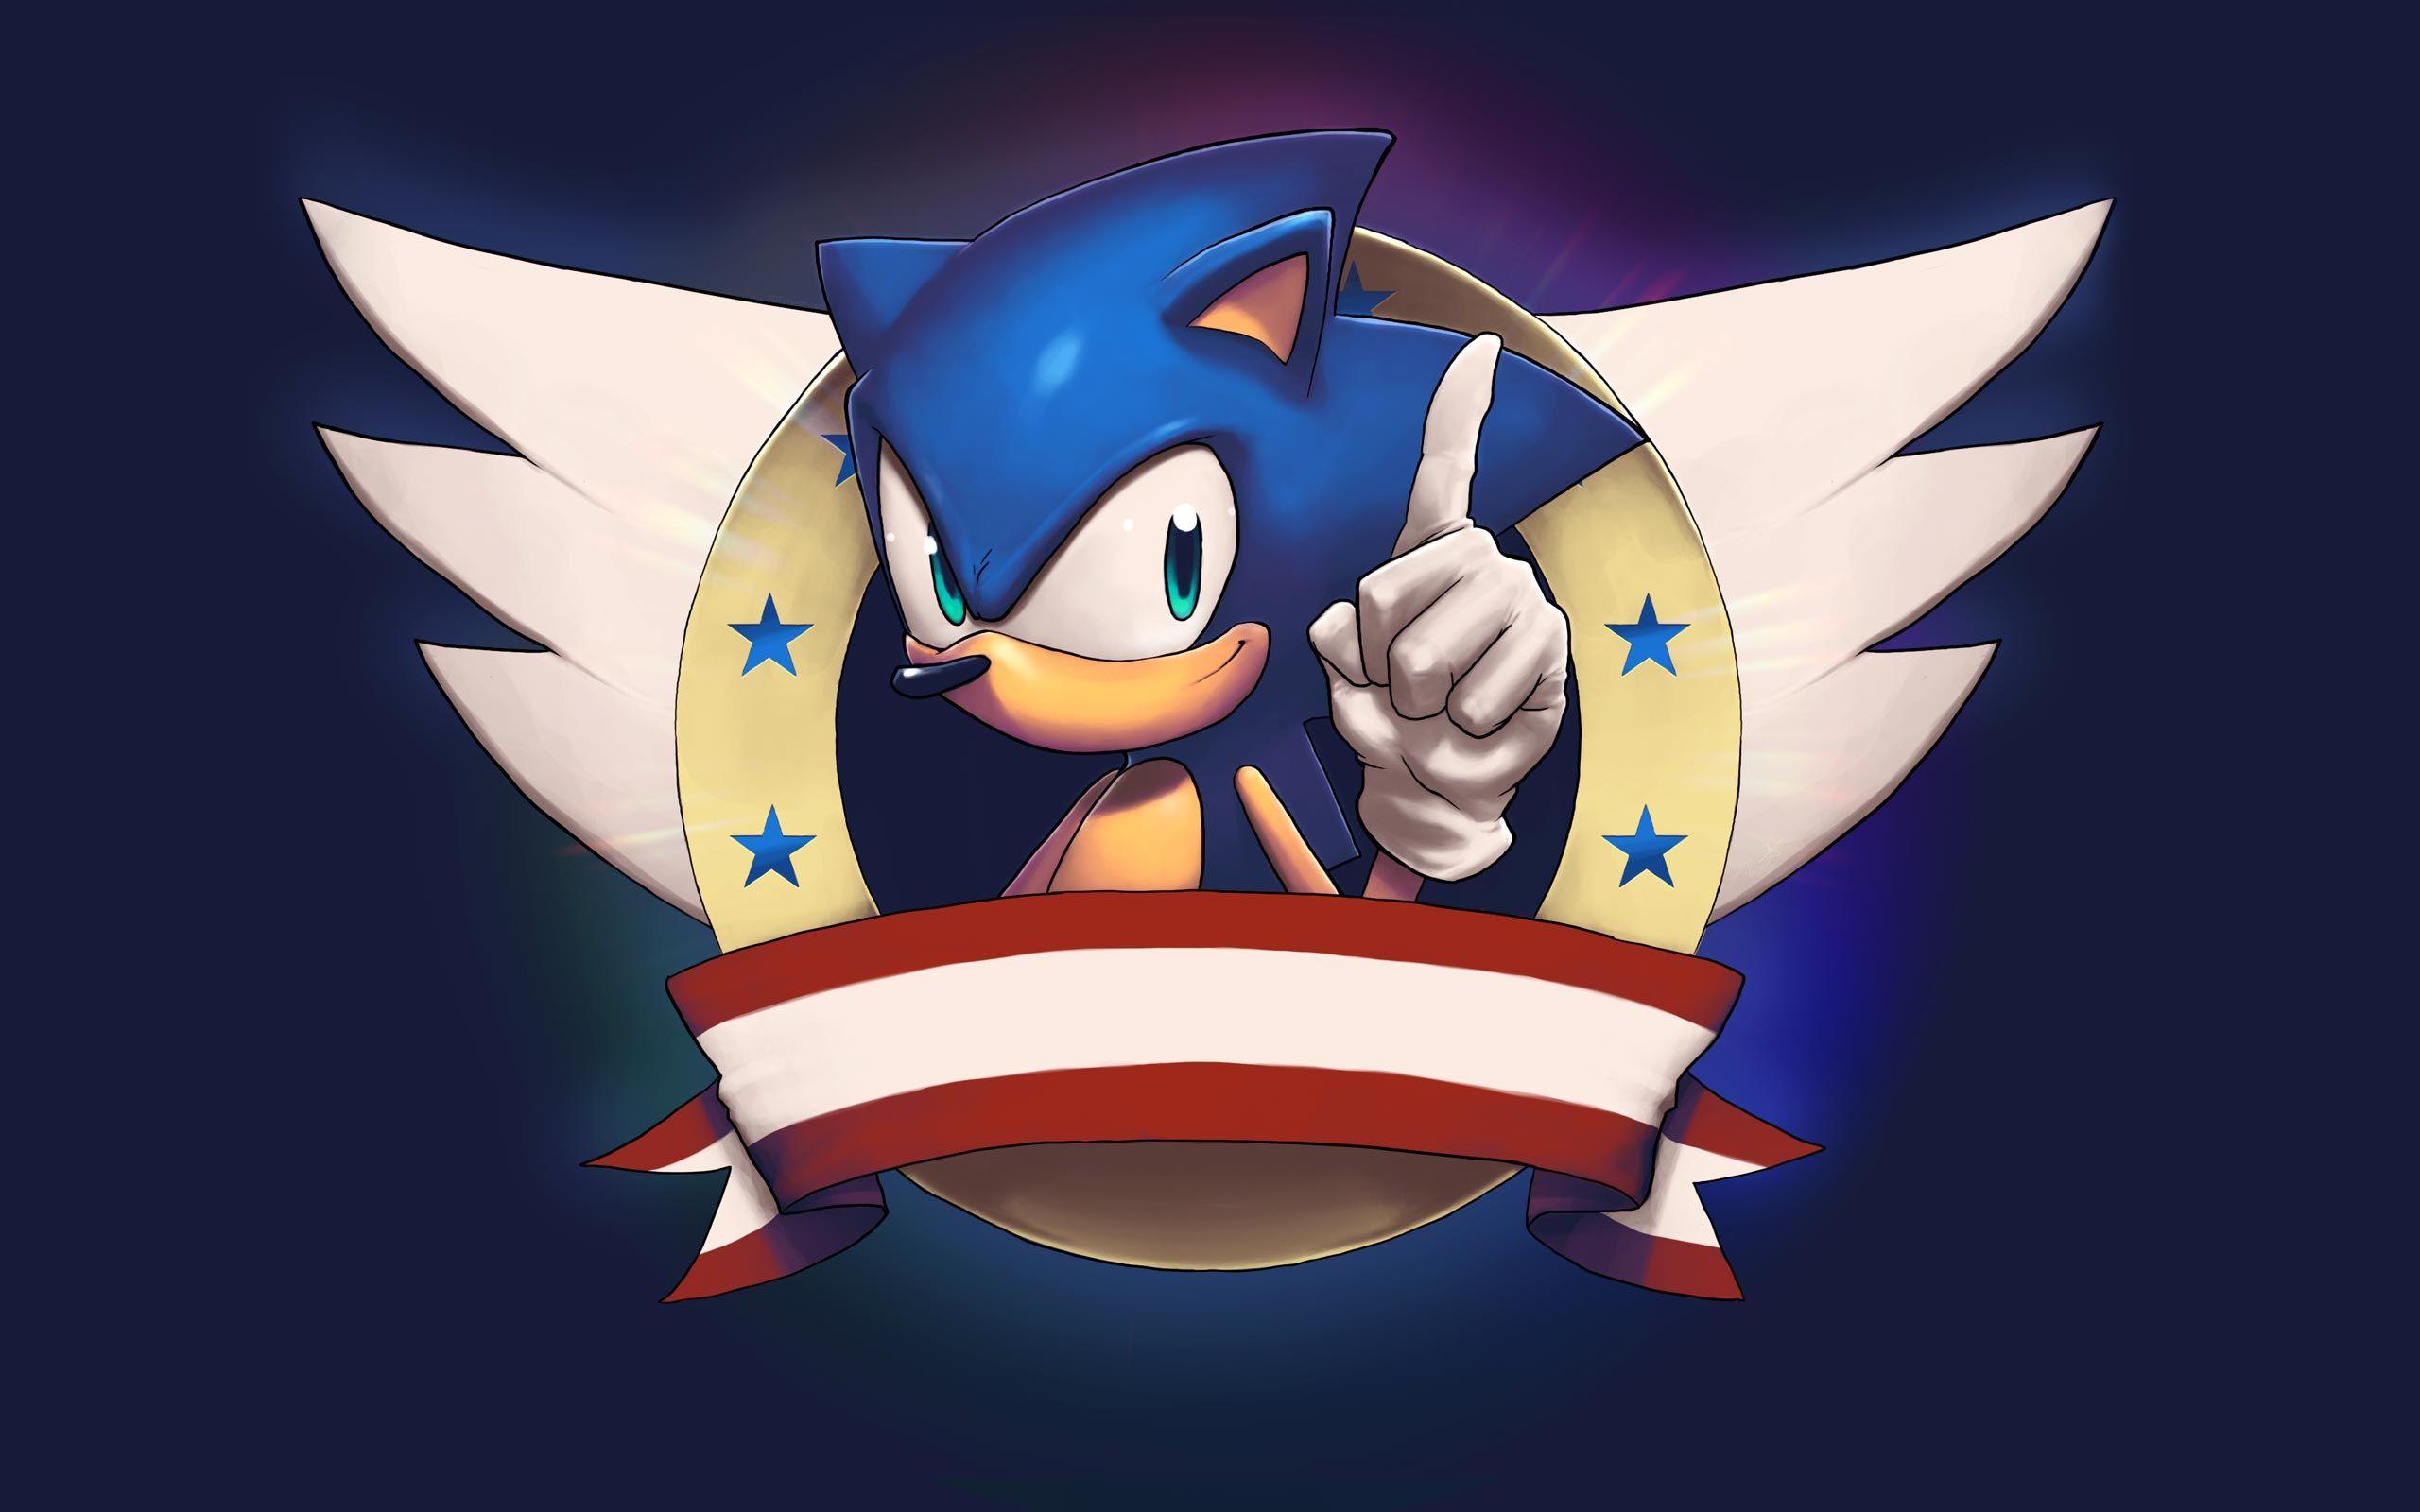 760+ Sonic HD Wallpapers and Backgrounds